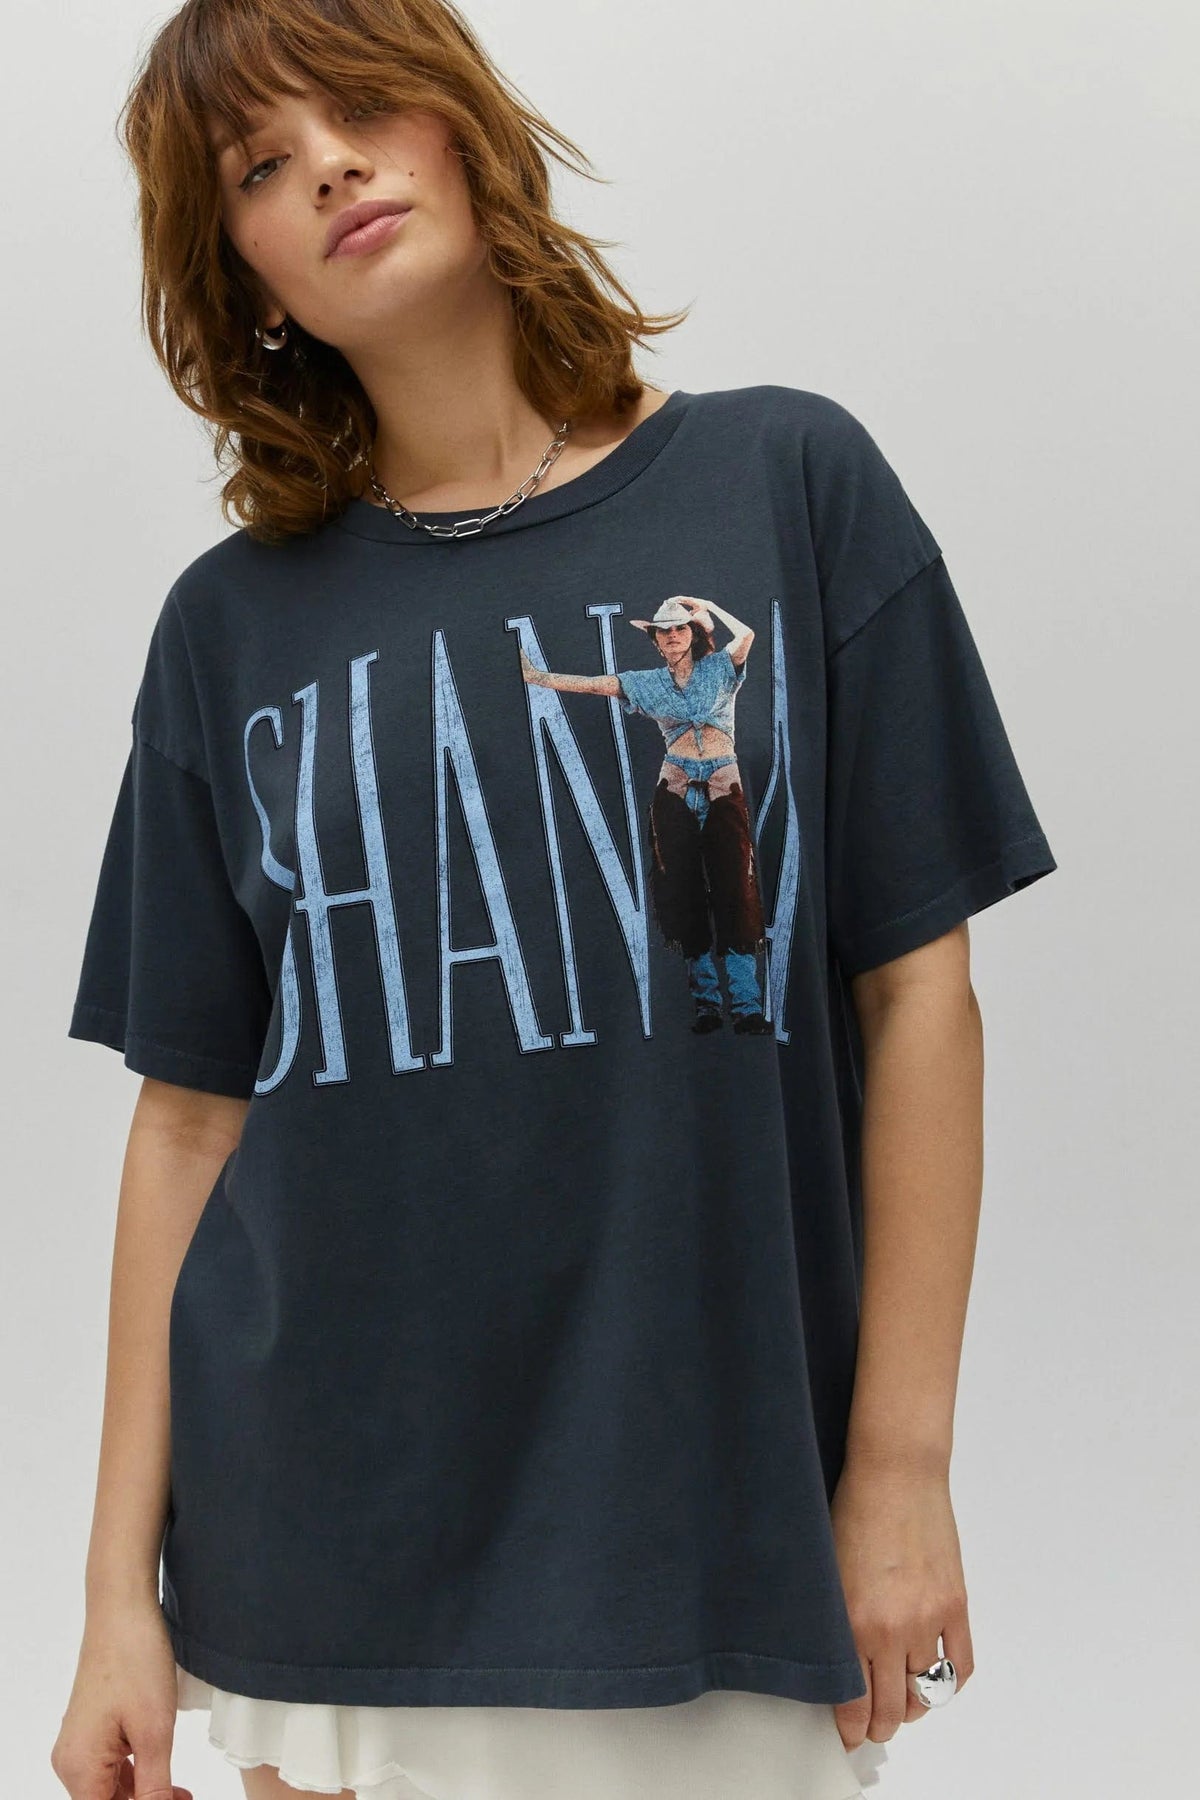 Daydreamer Shania Twain Boots Been Under | Merch Tee | Vintage Black - Women&#39;s Shirts &amp; Tops - Blooming Daily